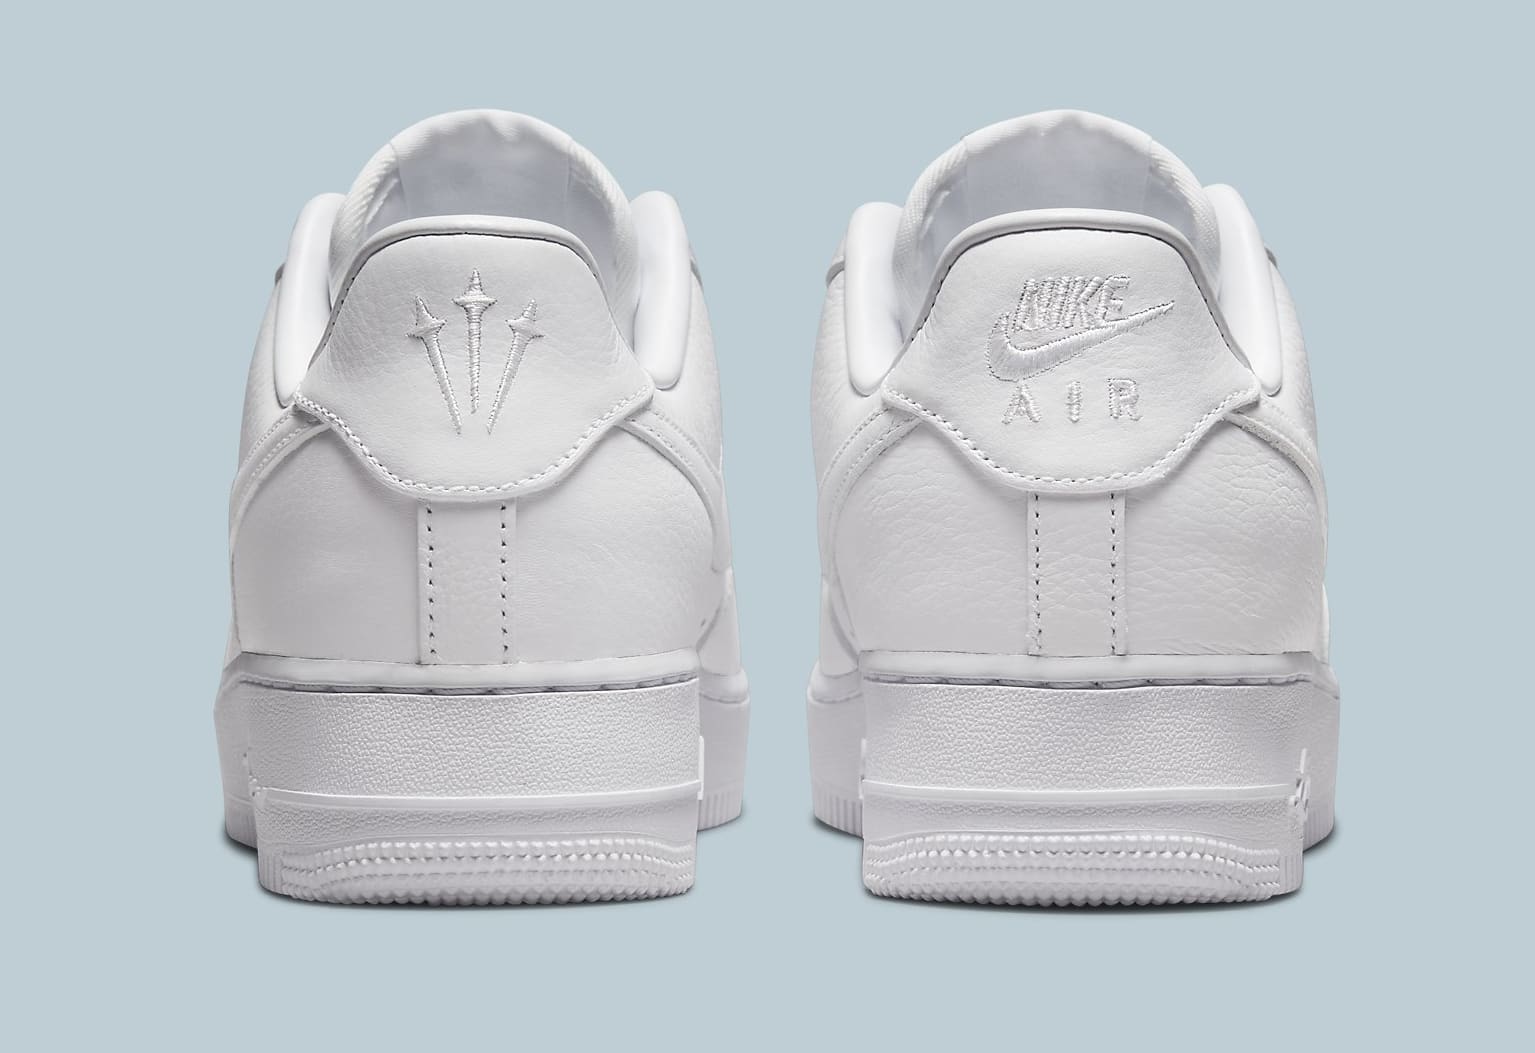 Drake’s NOCTA x Nike Air Force 1 Low Release Date Confirmed